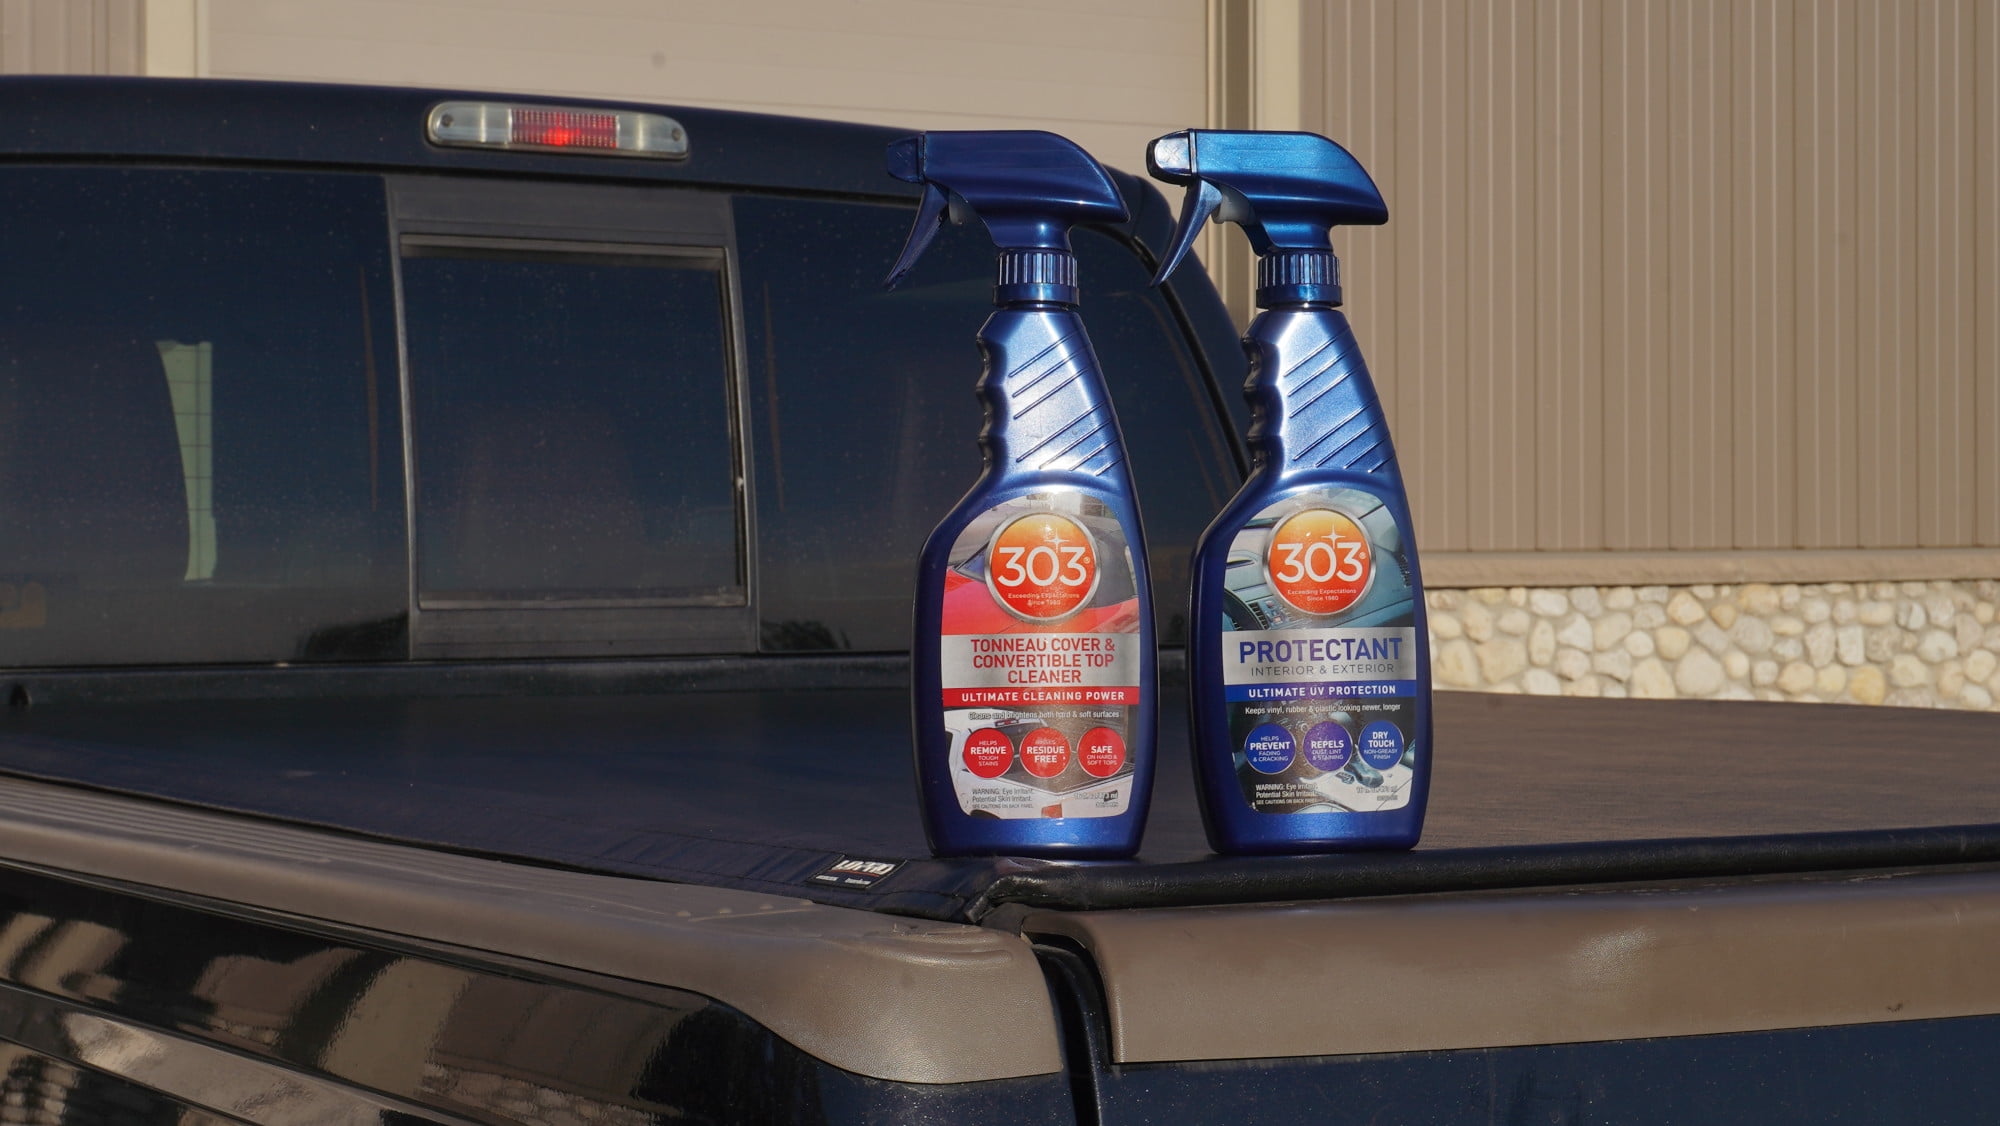 Clean and Protect Convertible Top With 303 Cleaner and Protectant